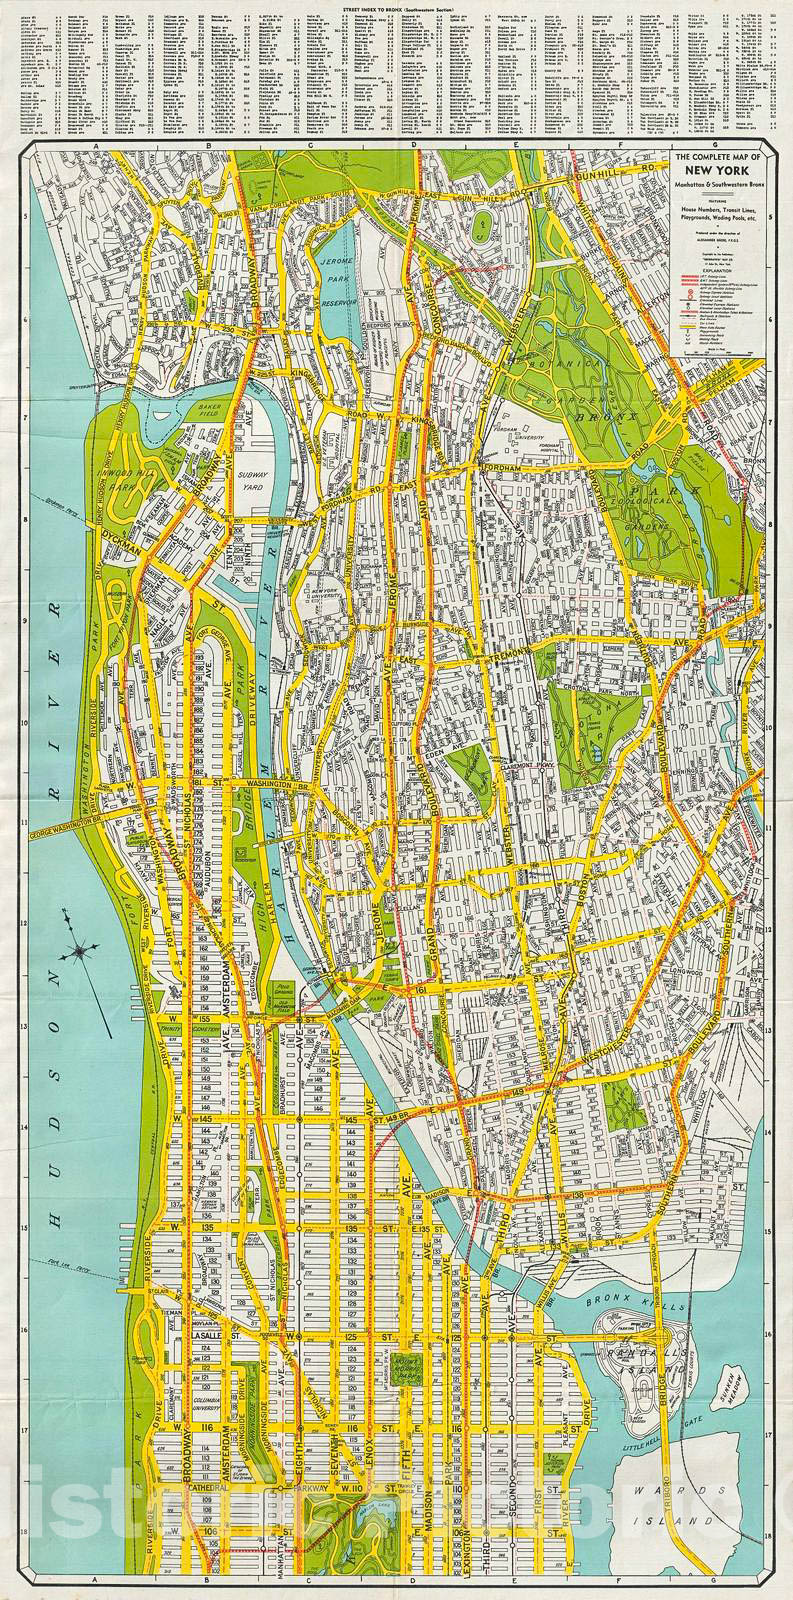 Historic Map : Geographia Company City Plan or Antique Map of New York City (Upper Manhattan and The Bronin x), 1940, Vintage Wall Art